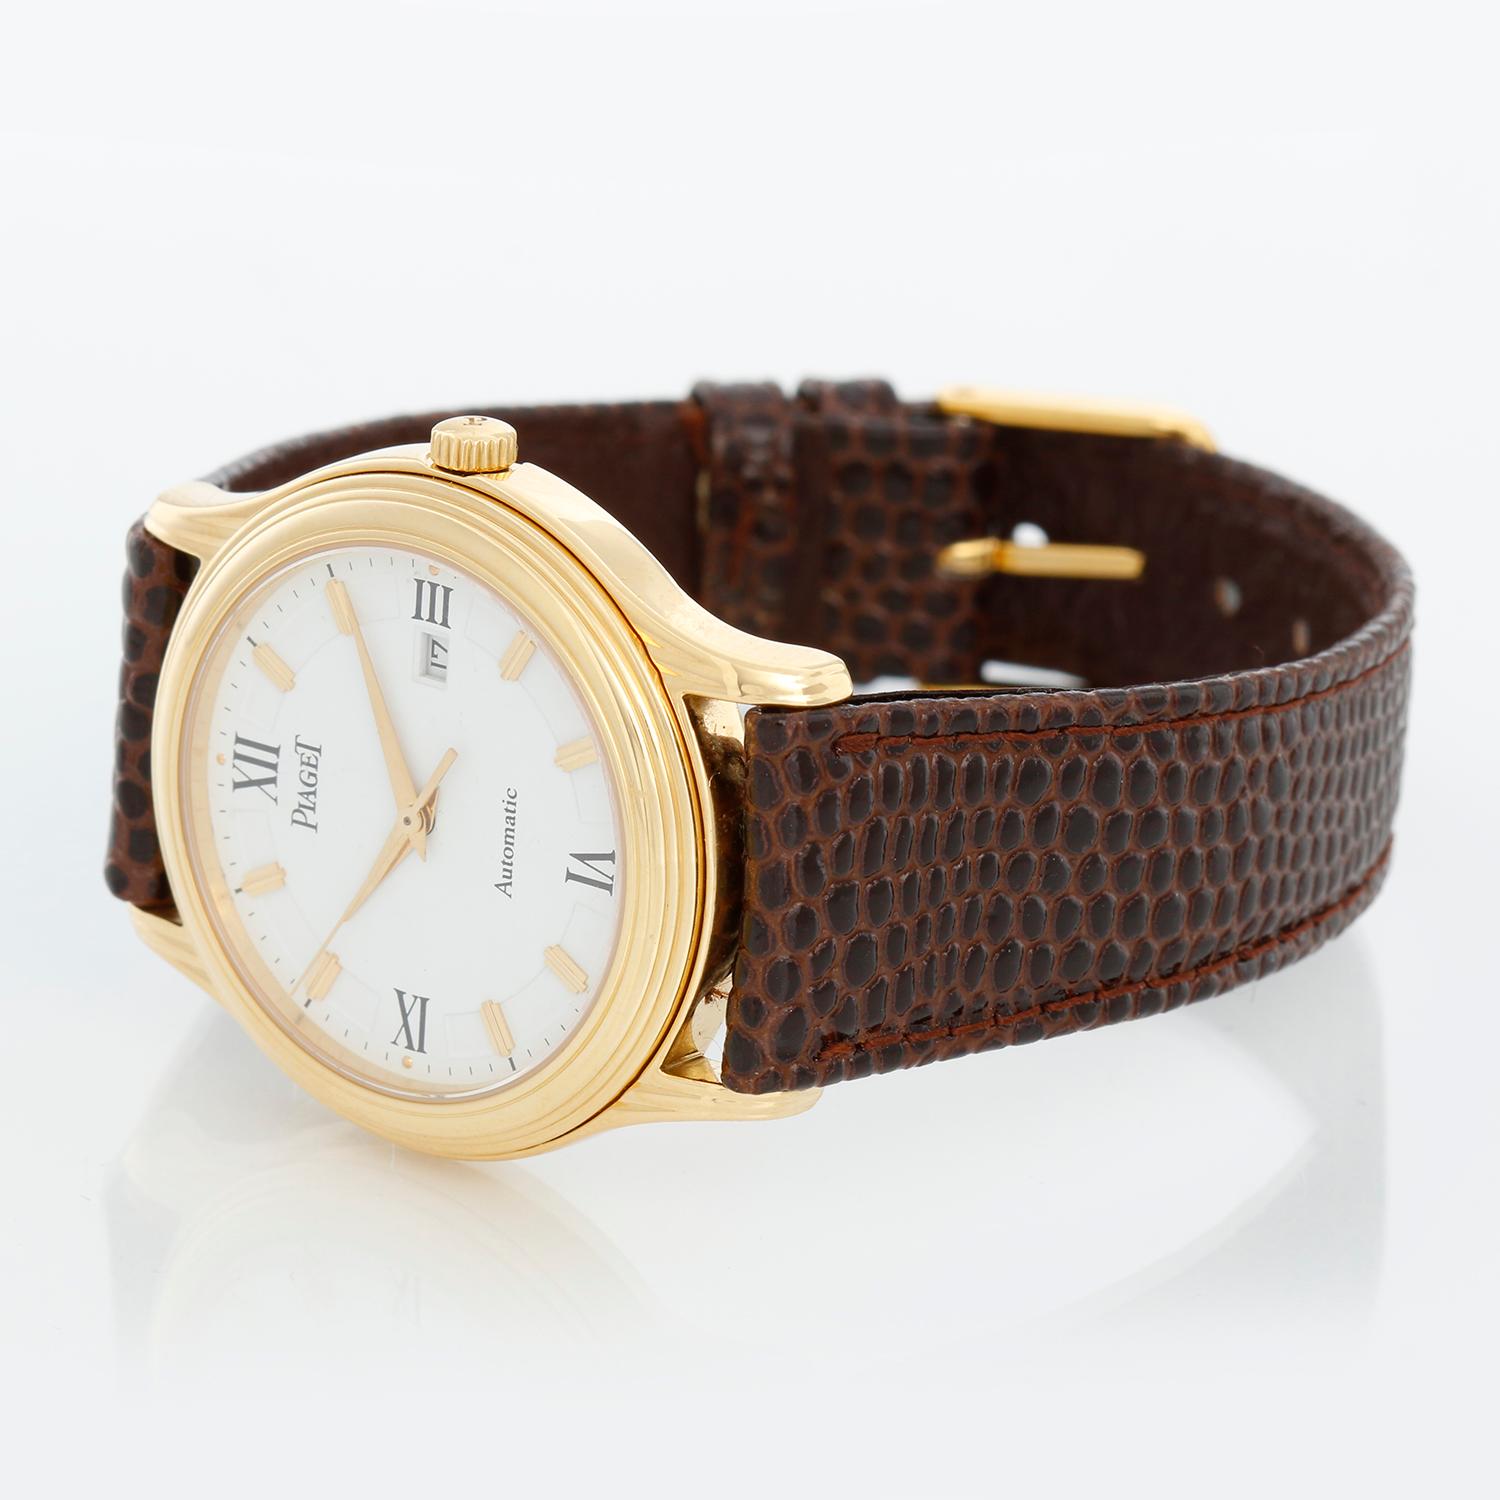 Piaget Polo 18K Yellow Gold Men's Watch GOA781 - Automatic. 18K Yellow gold ( 33  mm ). White dial with gold markers and black Roman numerals. Brown leather strap with tang buckle . Pre-owned with custom box.
